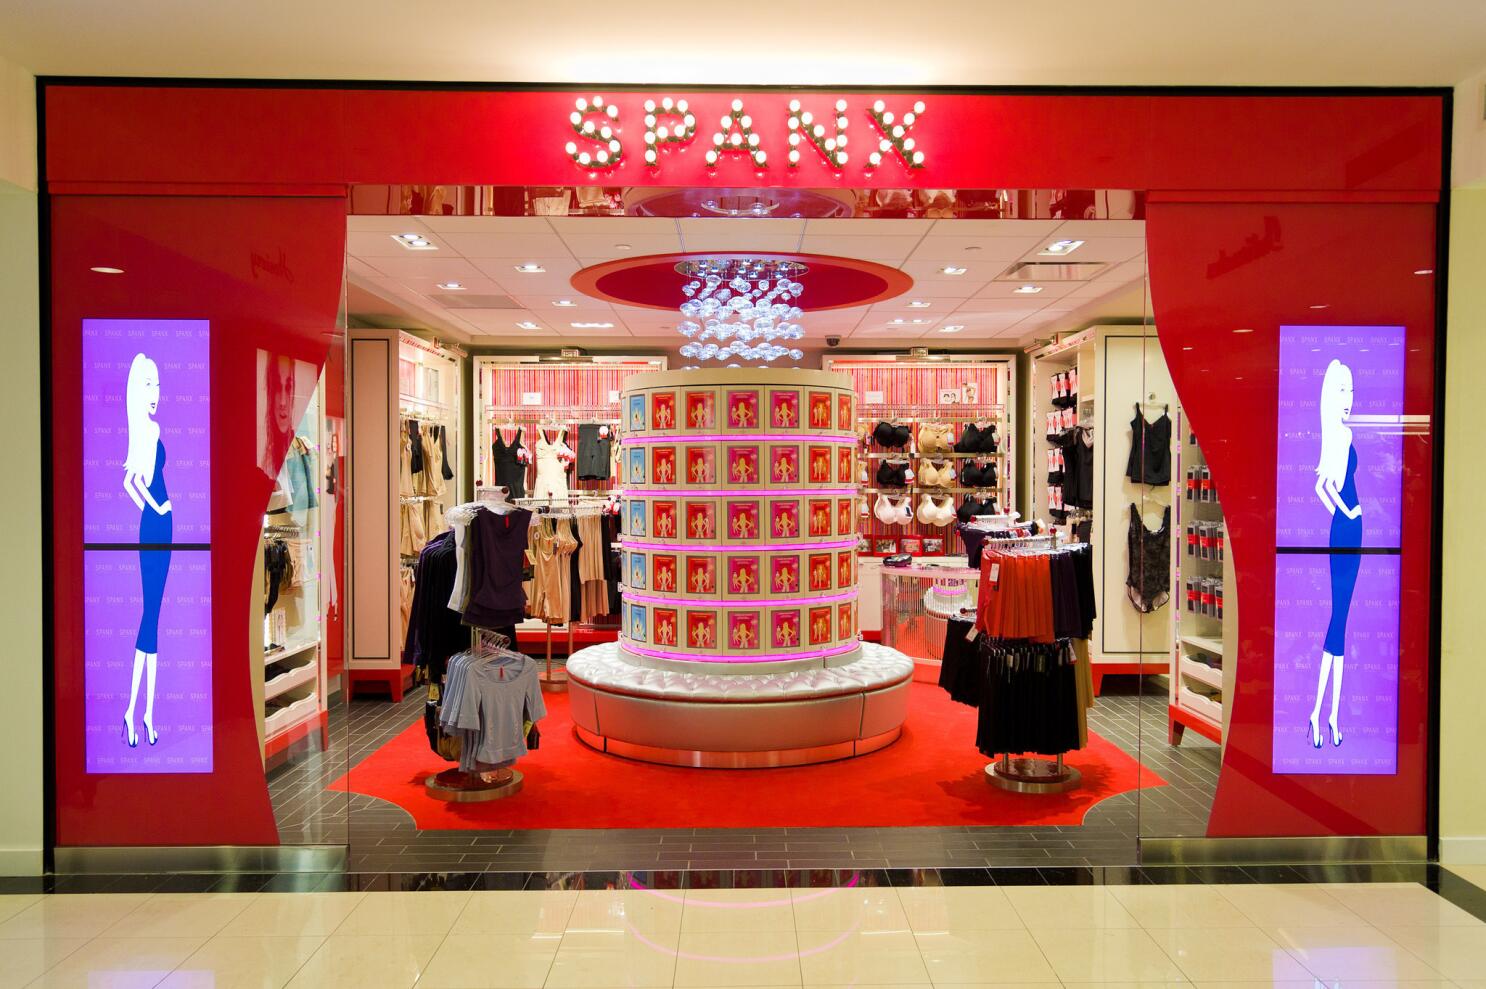 Spanx introduces retail pop-up series showcasing apparel and art